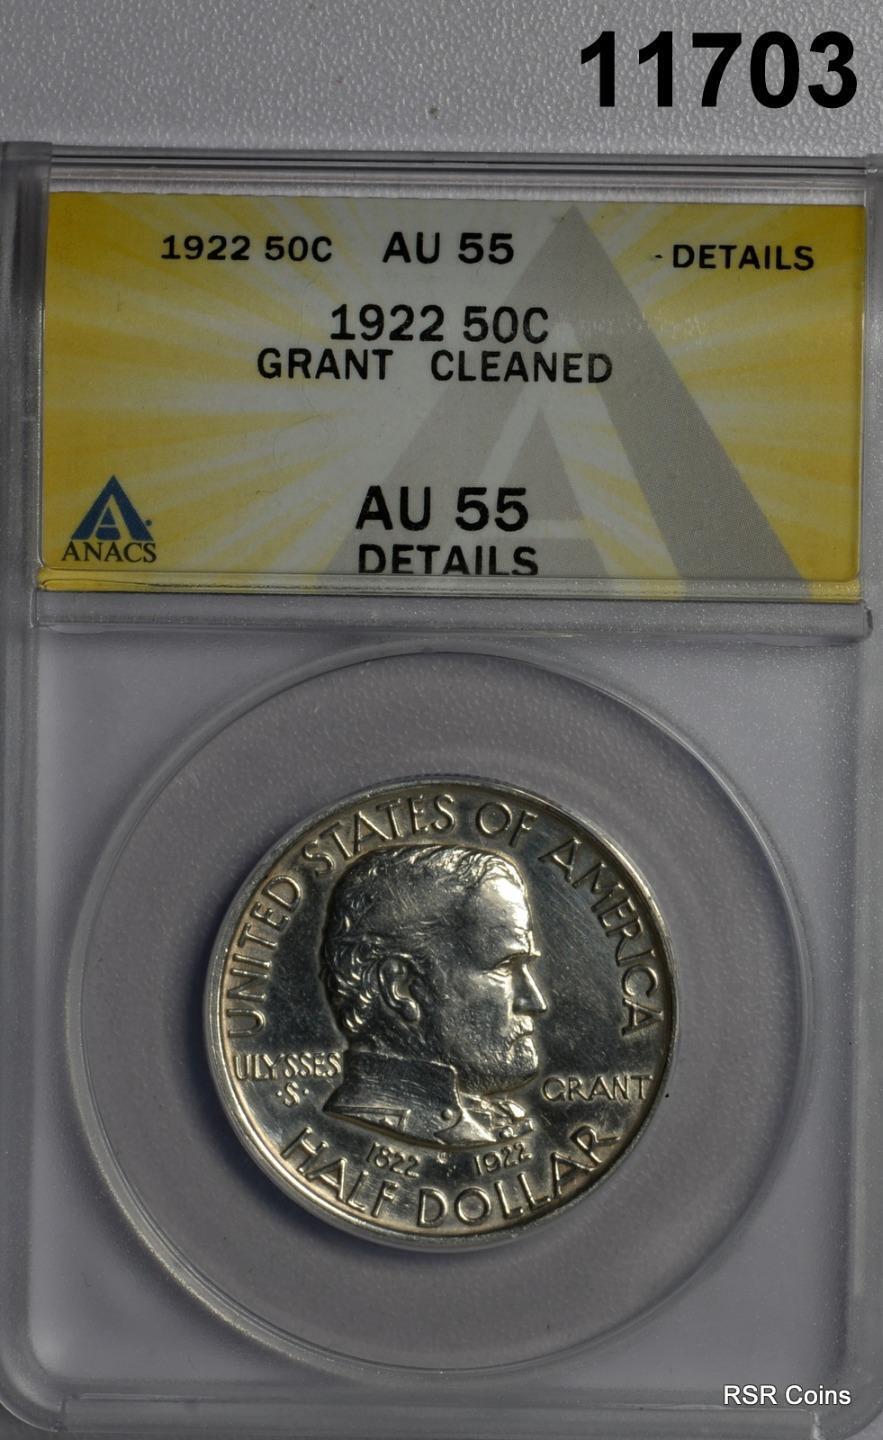 1922 GRANT COMMEMORATIVE HALF ANACS CERTIFIED AU55 CLEANED #11703